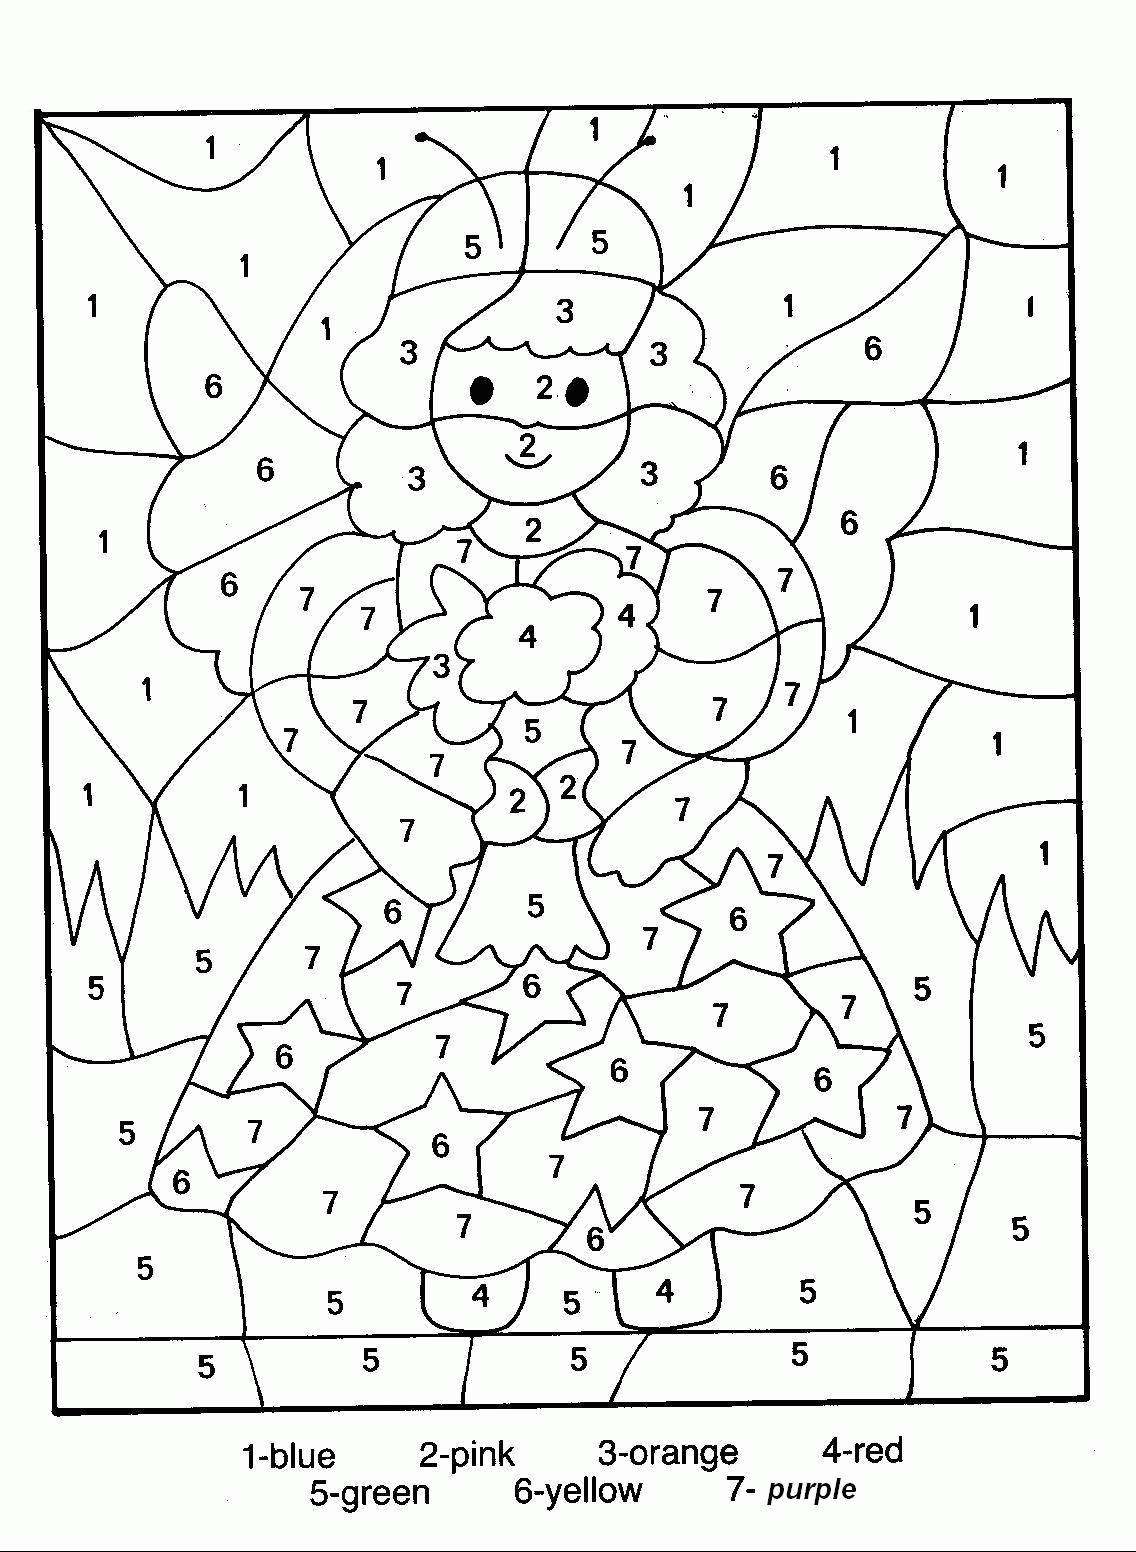 Coloring Pages With Color Codes - Coloring